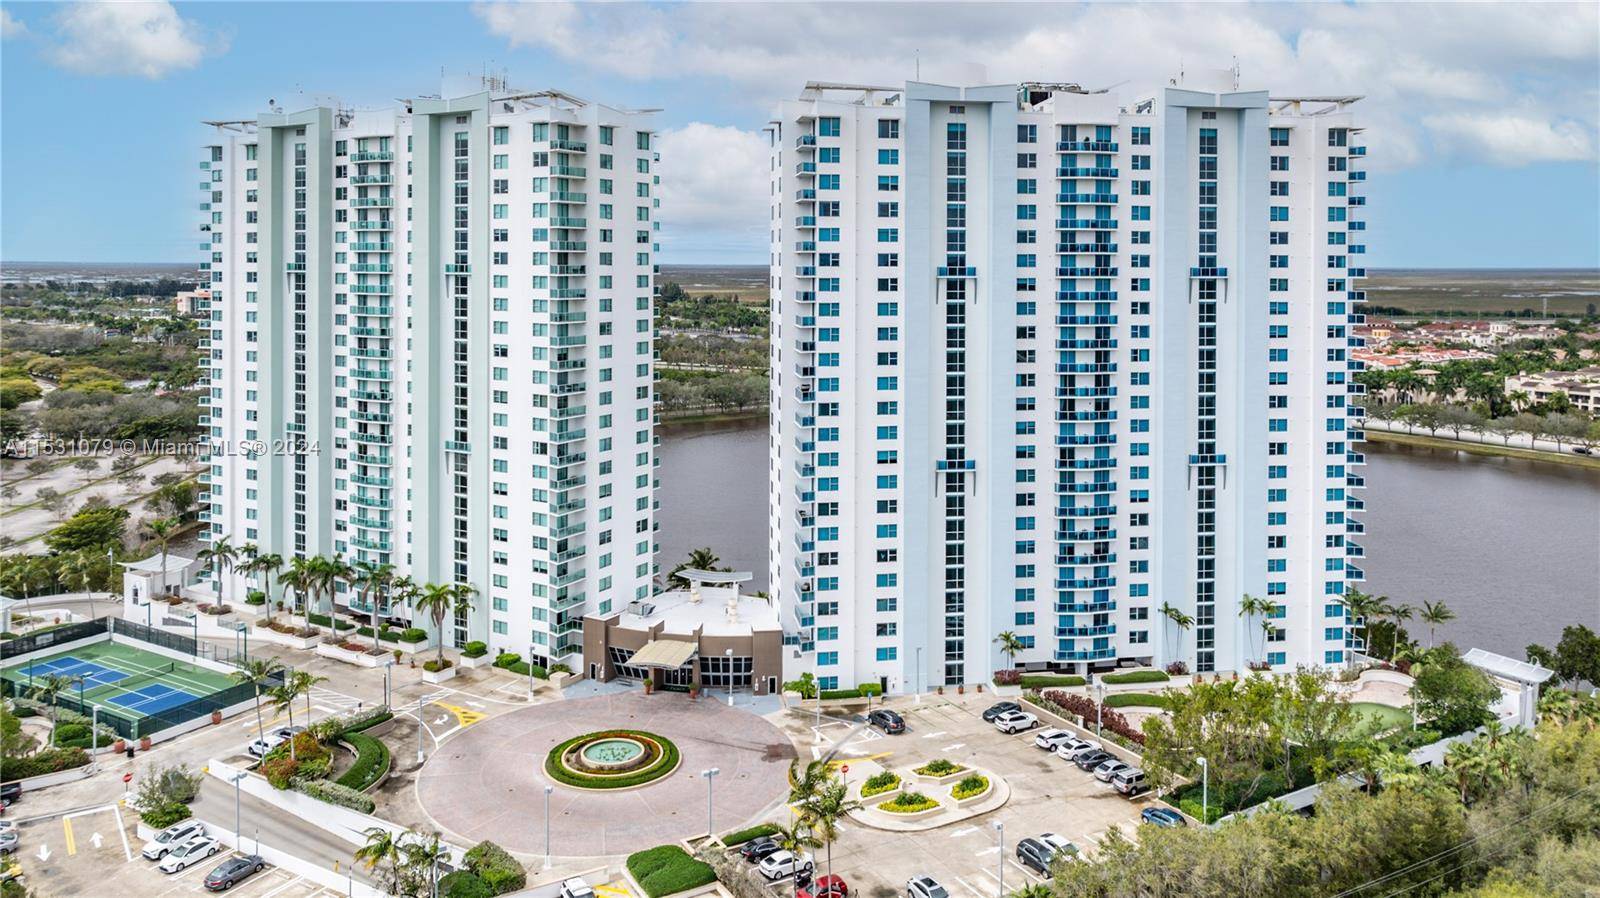 Condo with high UV protection at all windows and SG doors with IR Ceramic 7080 Window Film, NEST home control, 24 x 24 porcelain floors, with panoramic view of the ...